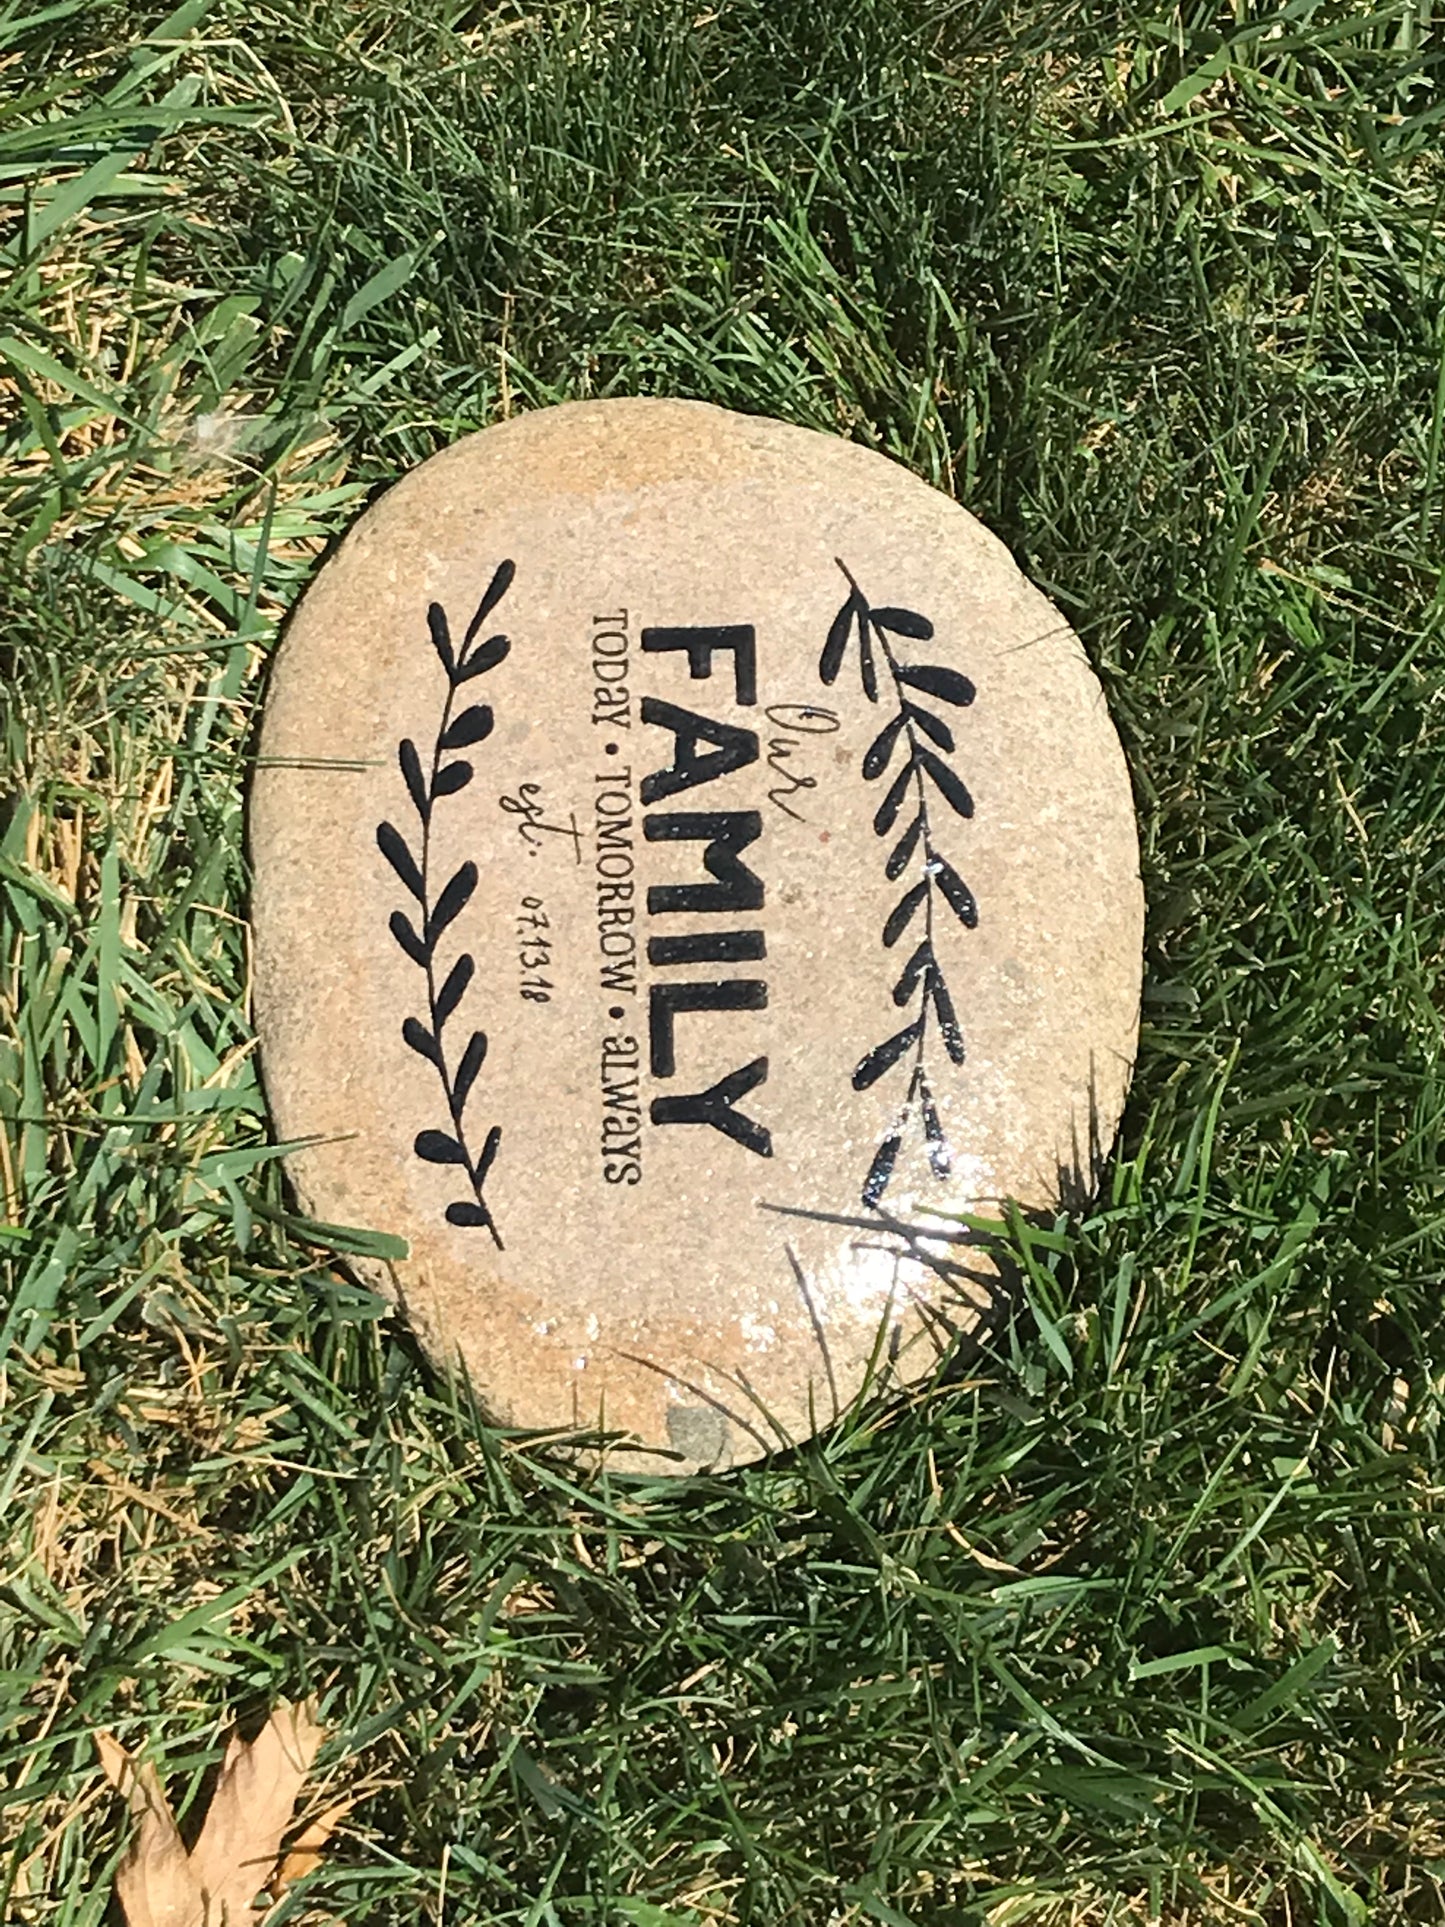 Large Decorative Garden Stone - Our Family